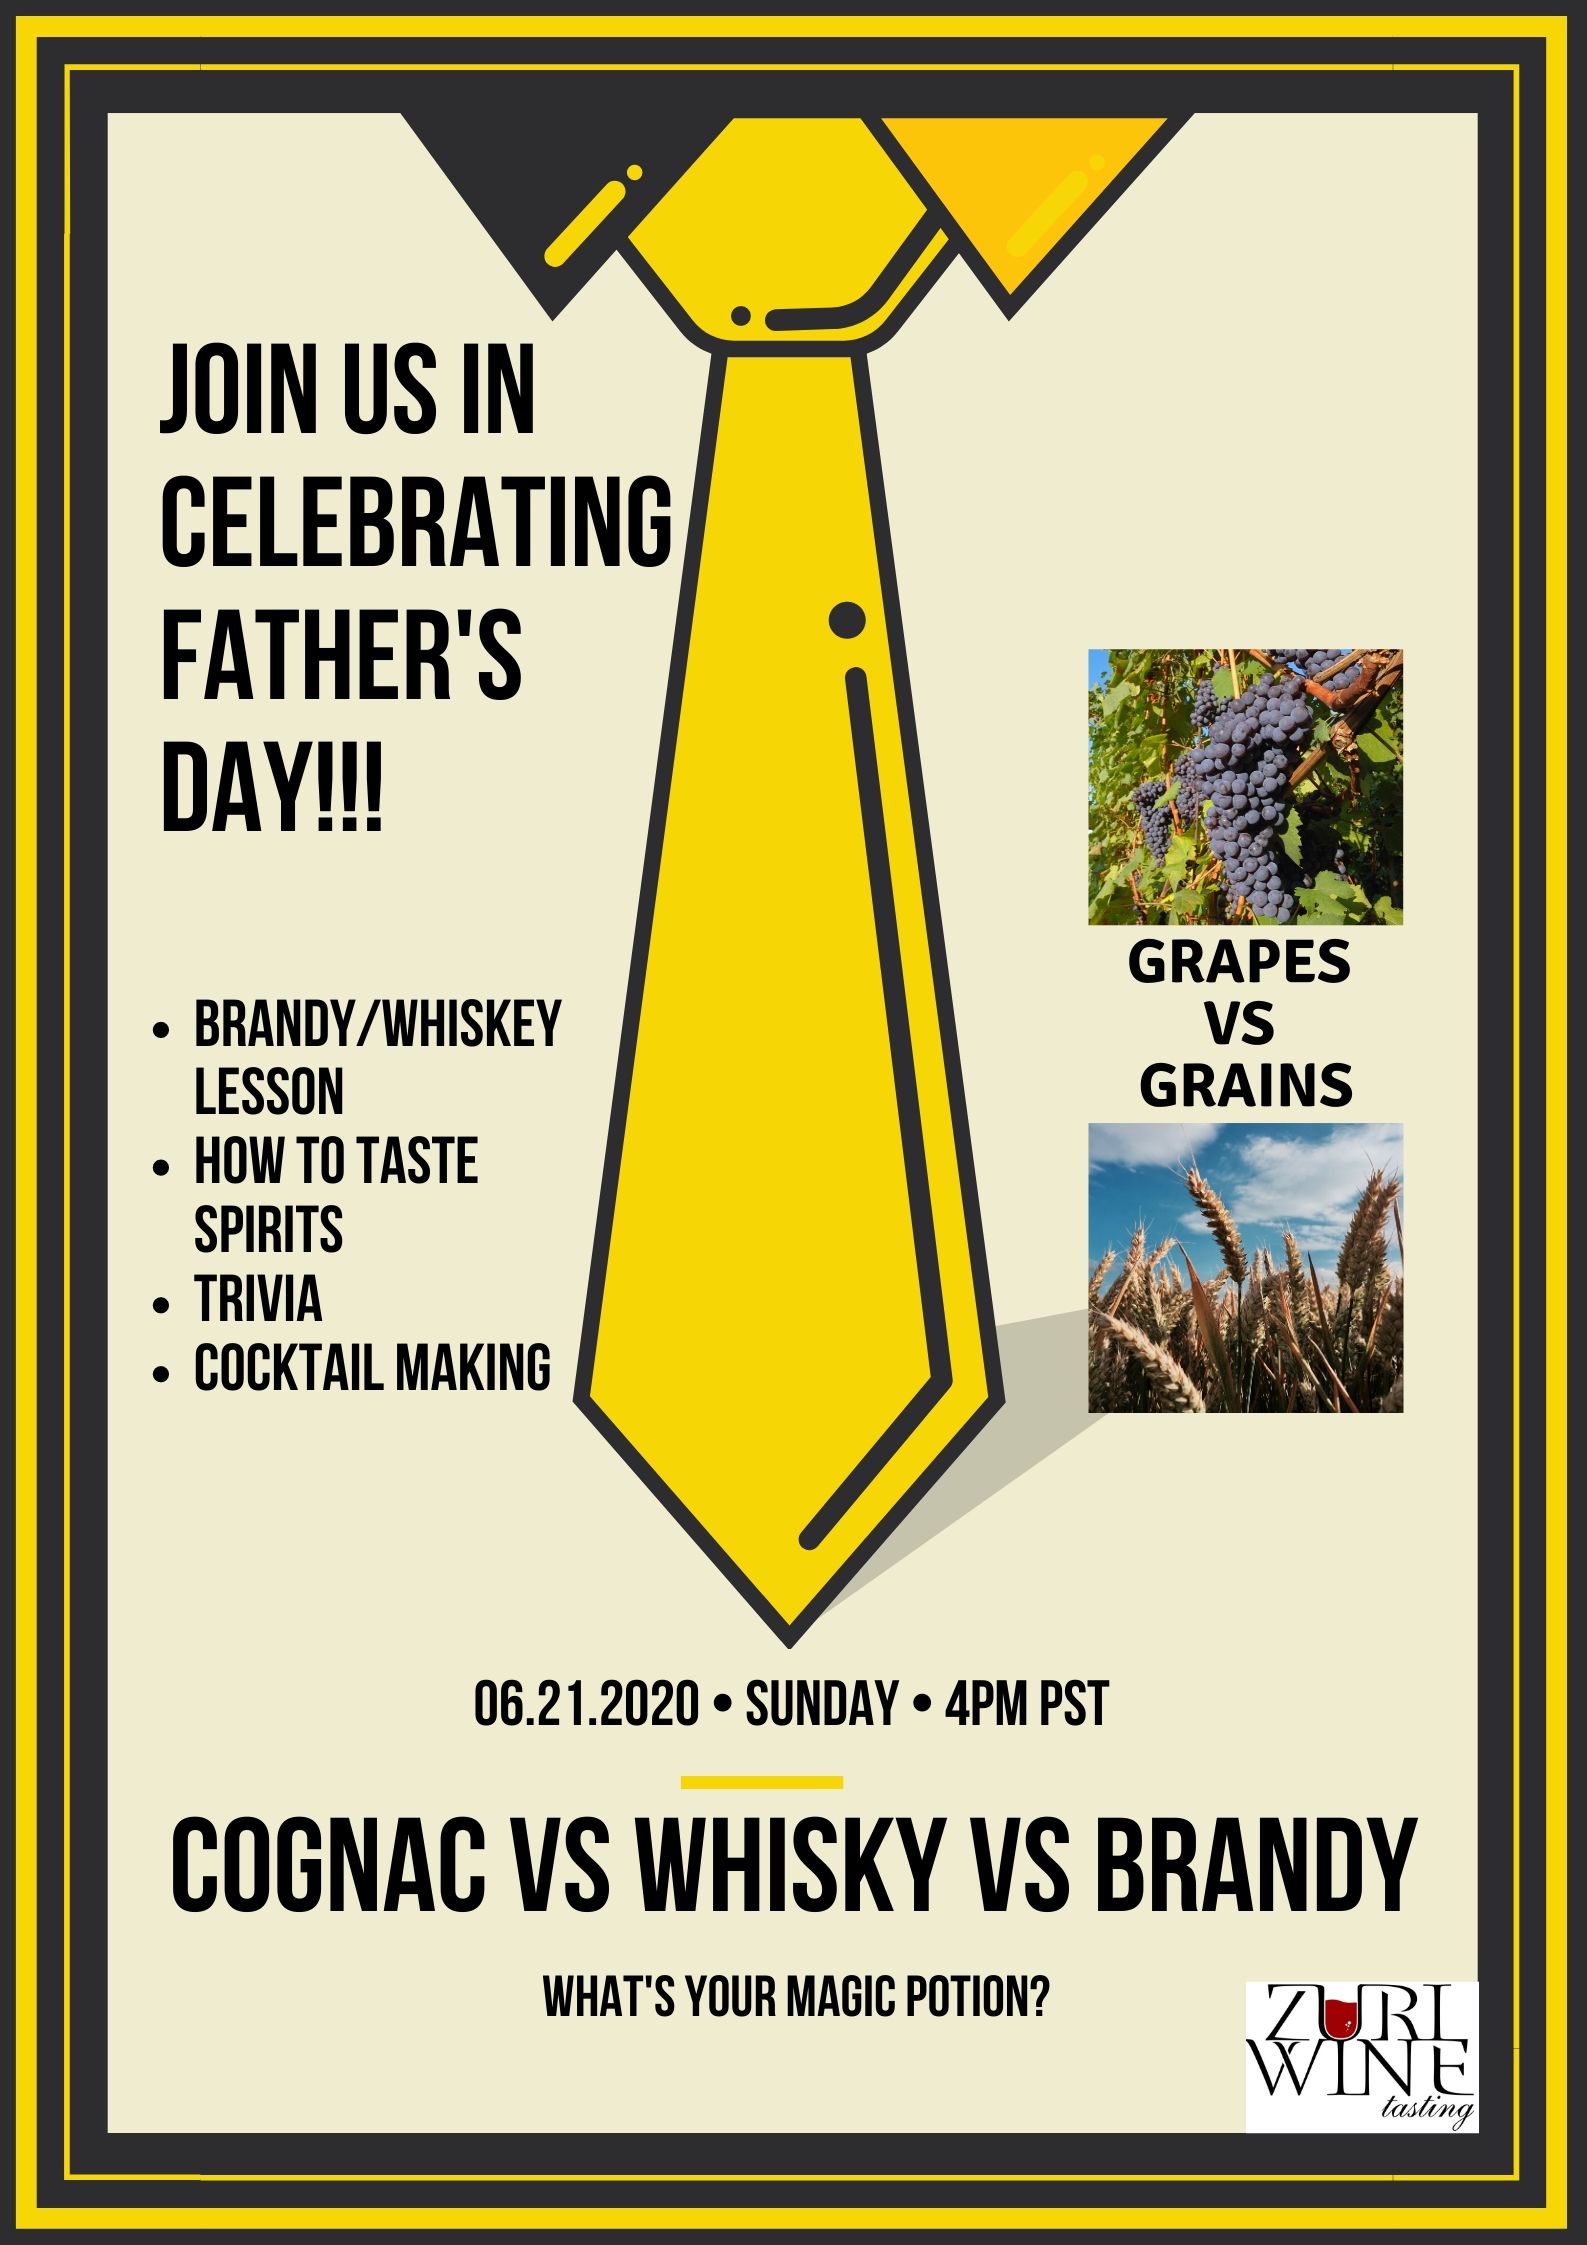 Grapes Vs Grains Father S Day Inspired Cognac And Whisky Class